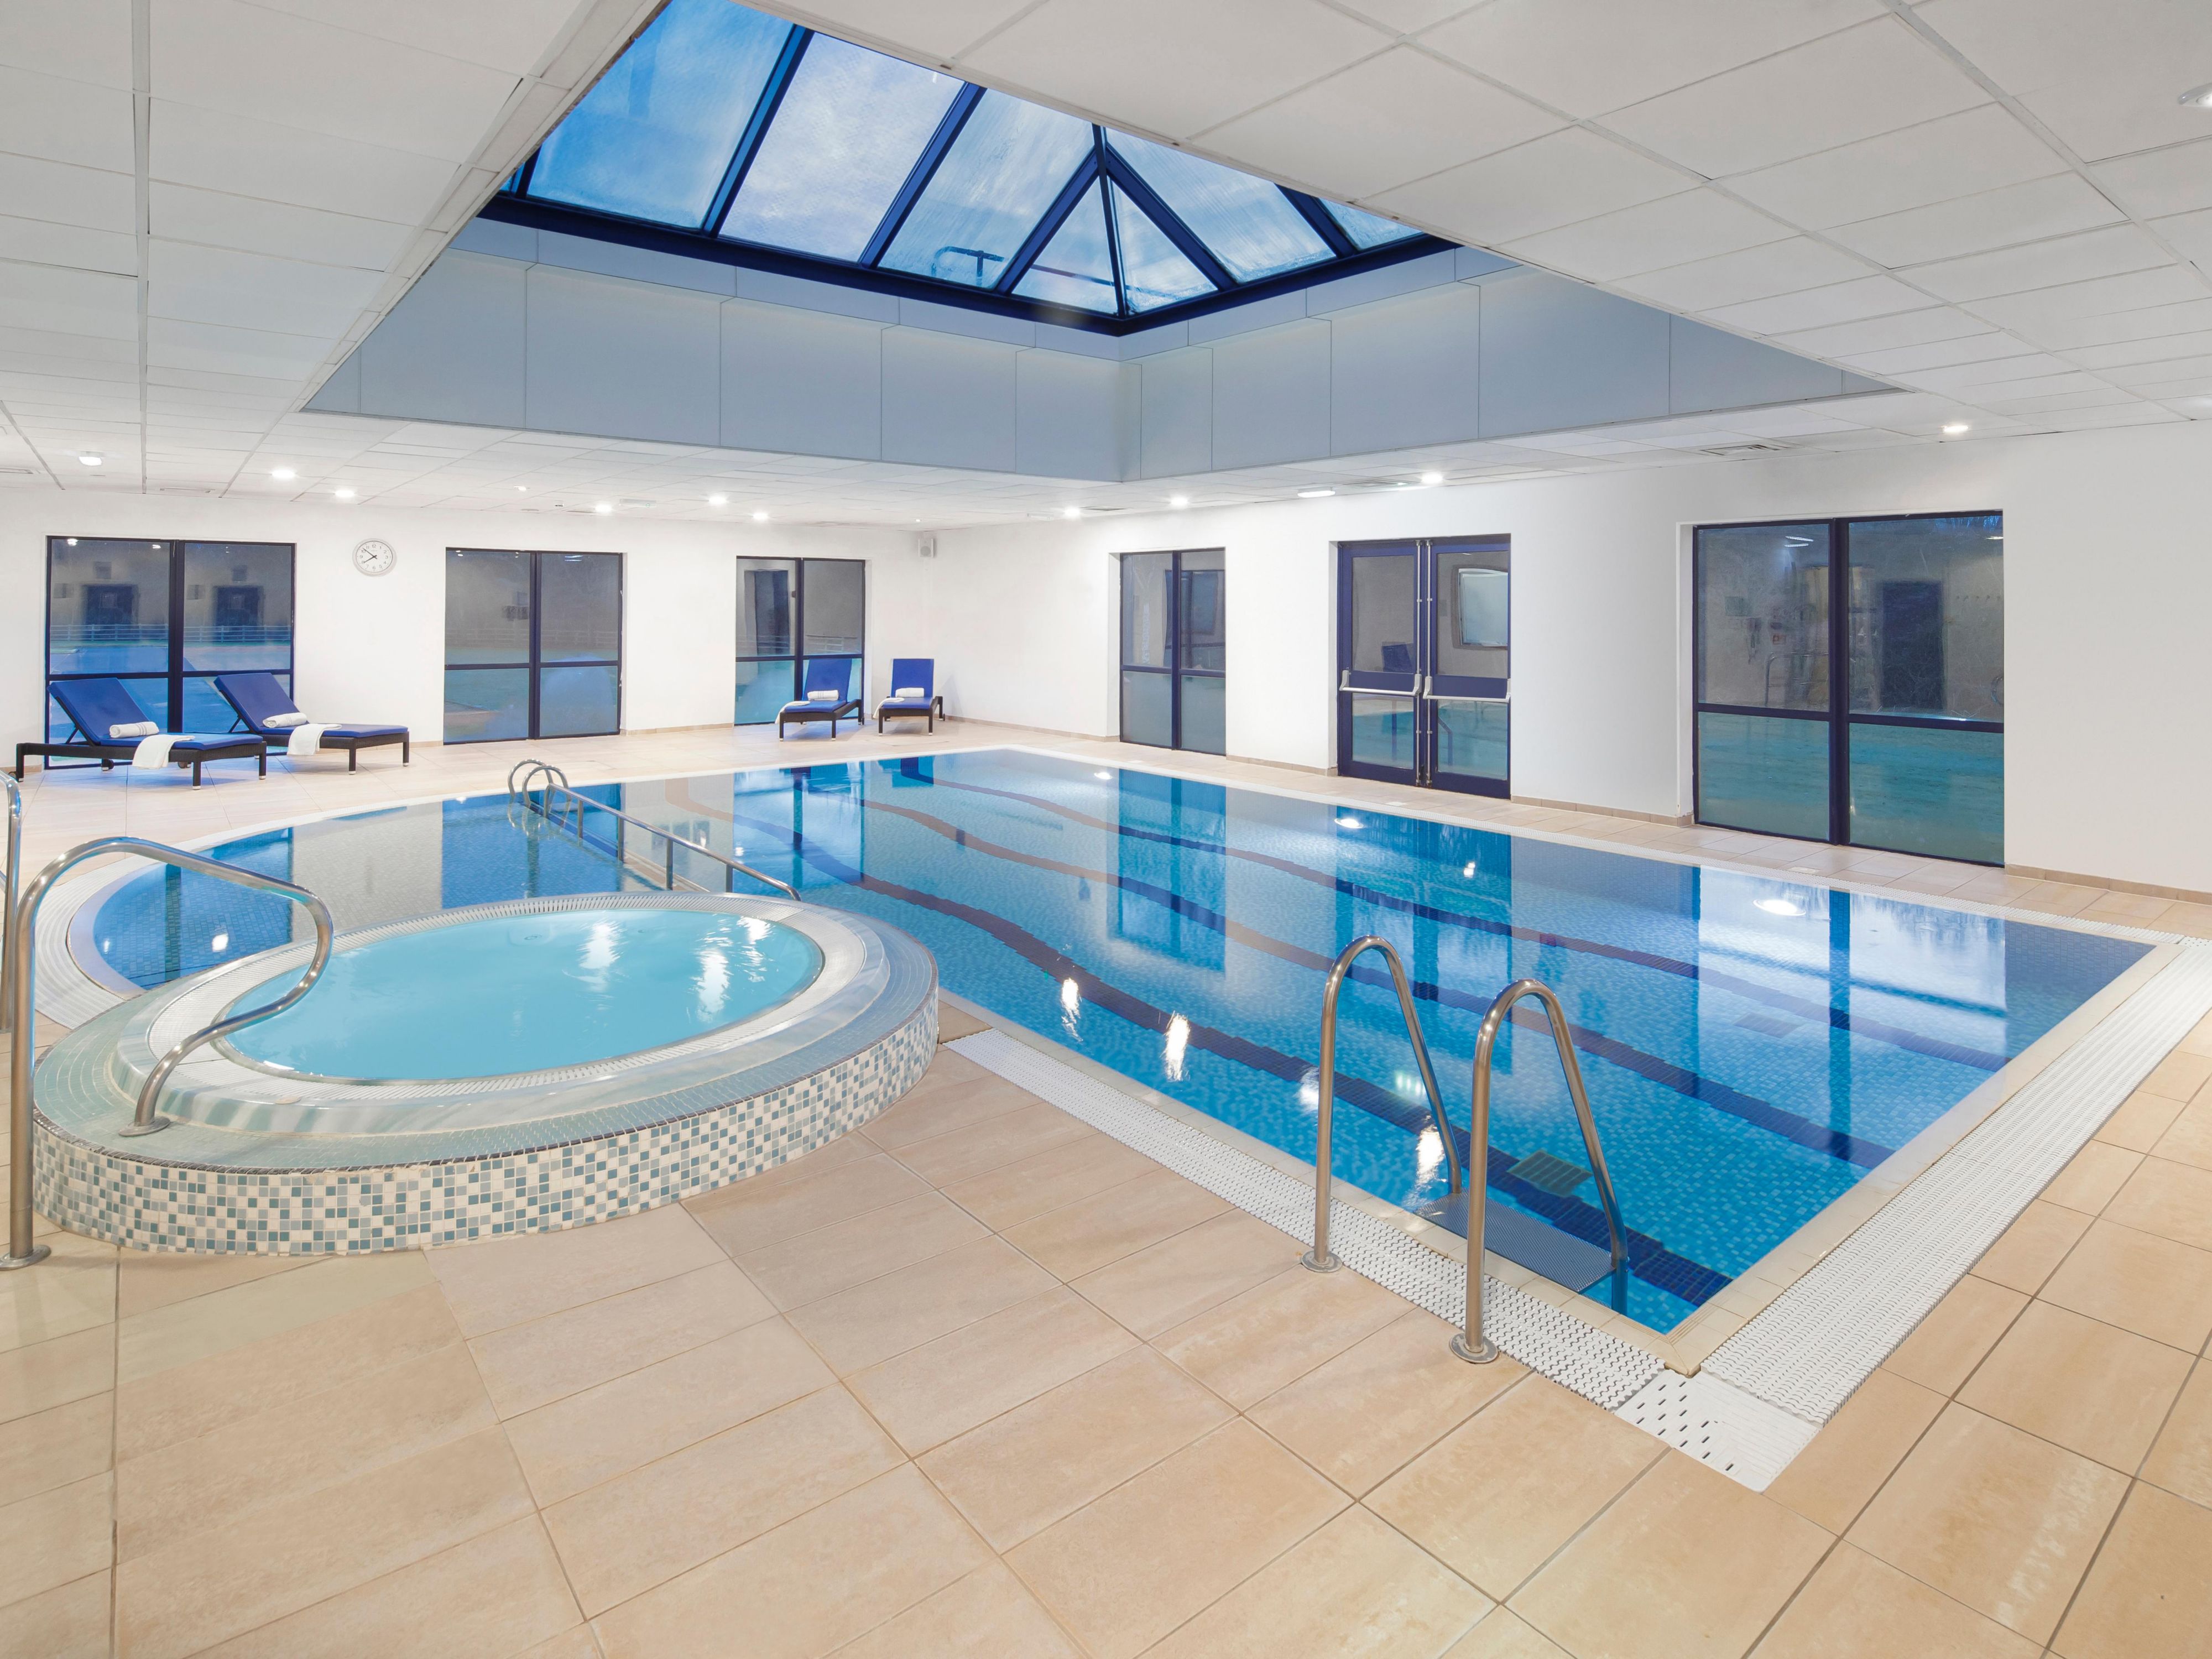 Our on-site gymnasium & swimming pool is open Mon - Fri, 6.30am - 10.00pm and weekends 7.30am - 9.00pm. 
Available to hotel residents, paying members & purchased day passes. Our facilities include: Gymnasium, Swimming Pool, Sauna, Steam Room and Hot Tub 
Class Studio with the following classes and more: HIIT Training, Yoga, Boot Camp & Body Blast.